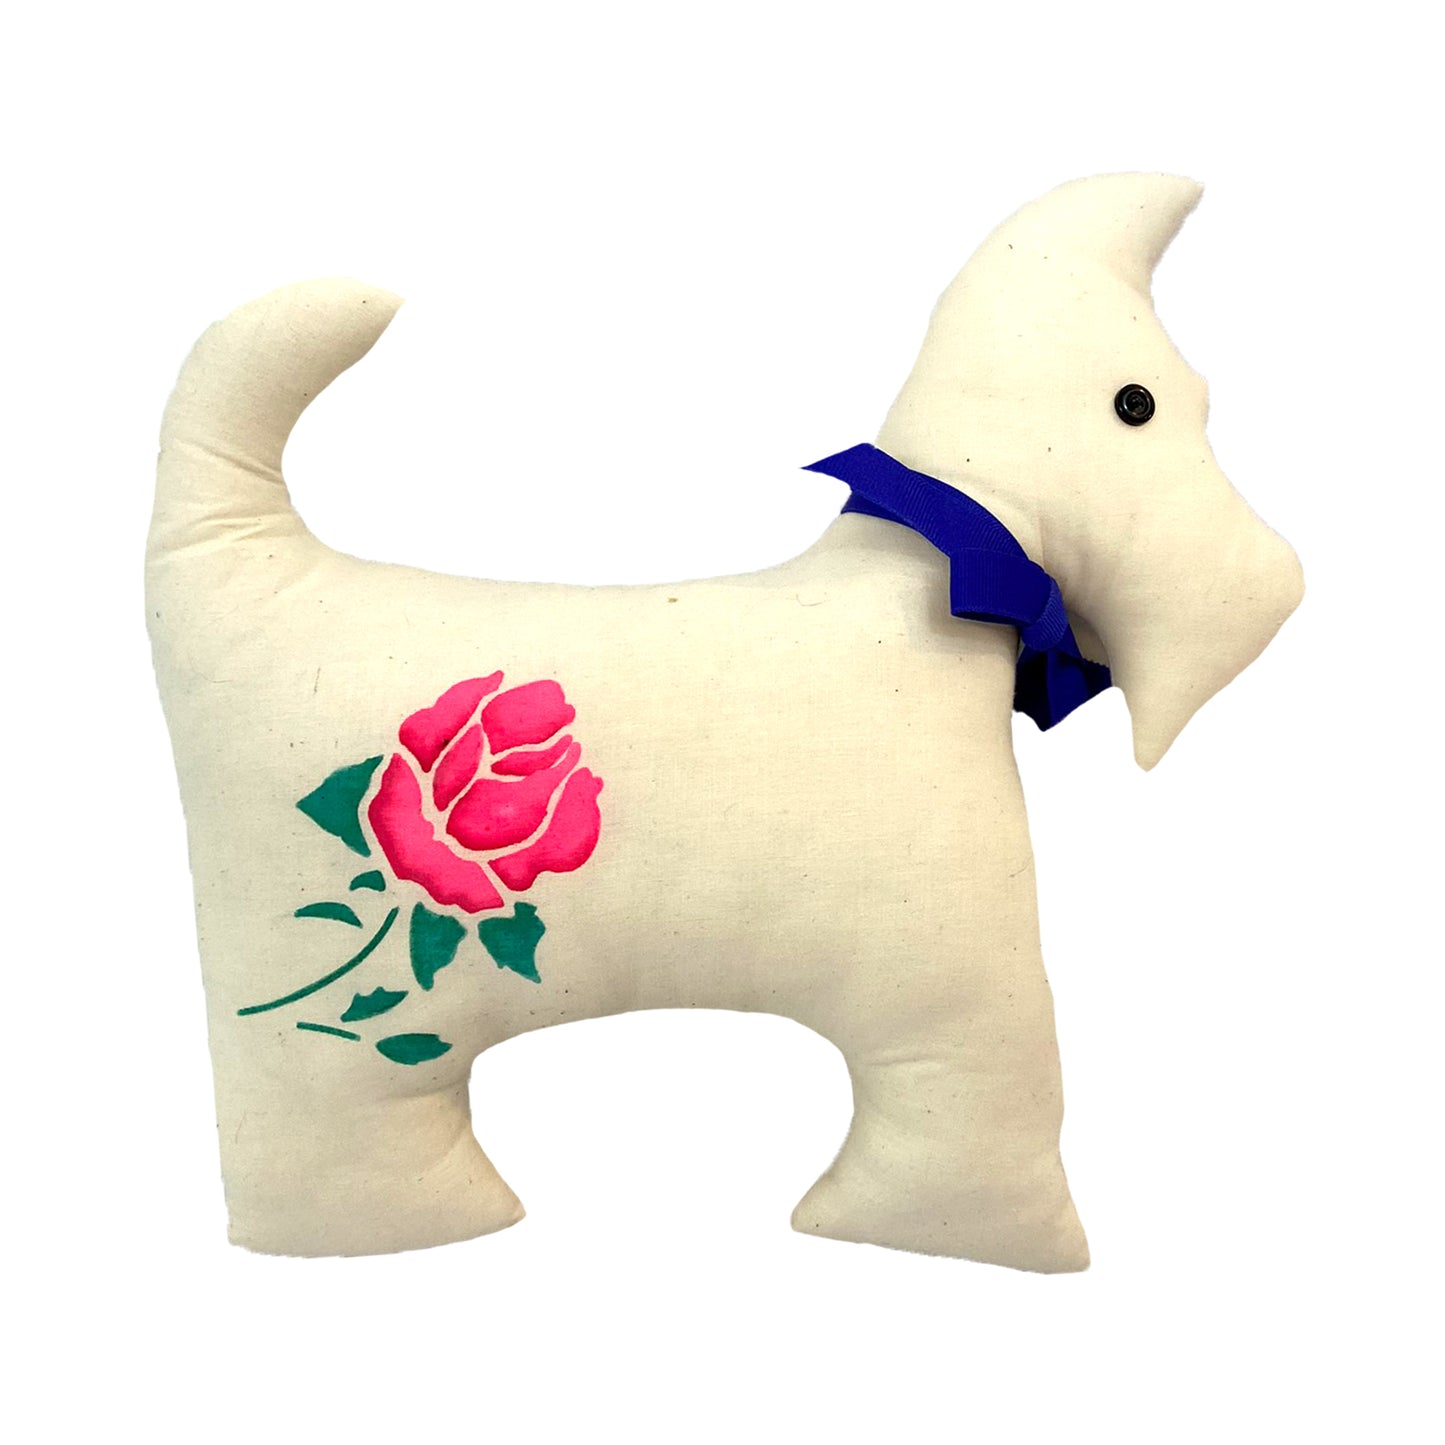 Muslin Scottie Dog Pillow DIY Sewing and Craft Kit